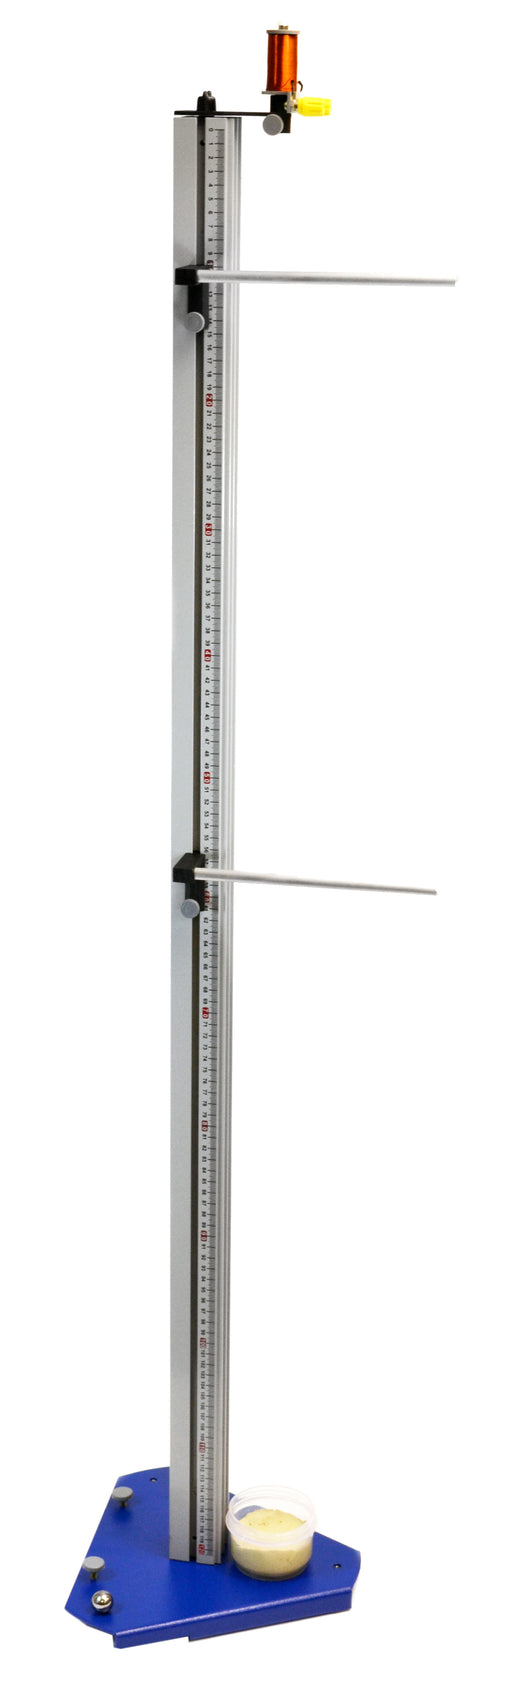 Free Fall Apparatus, Advanced 'G' Kit - Ideal for Studying Acceleration by Gravity - Aluminum Extrusion Column with Scale, Electromagnet, Rods and Clamps - Eisco Labs